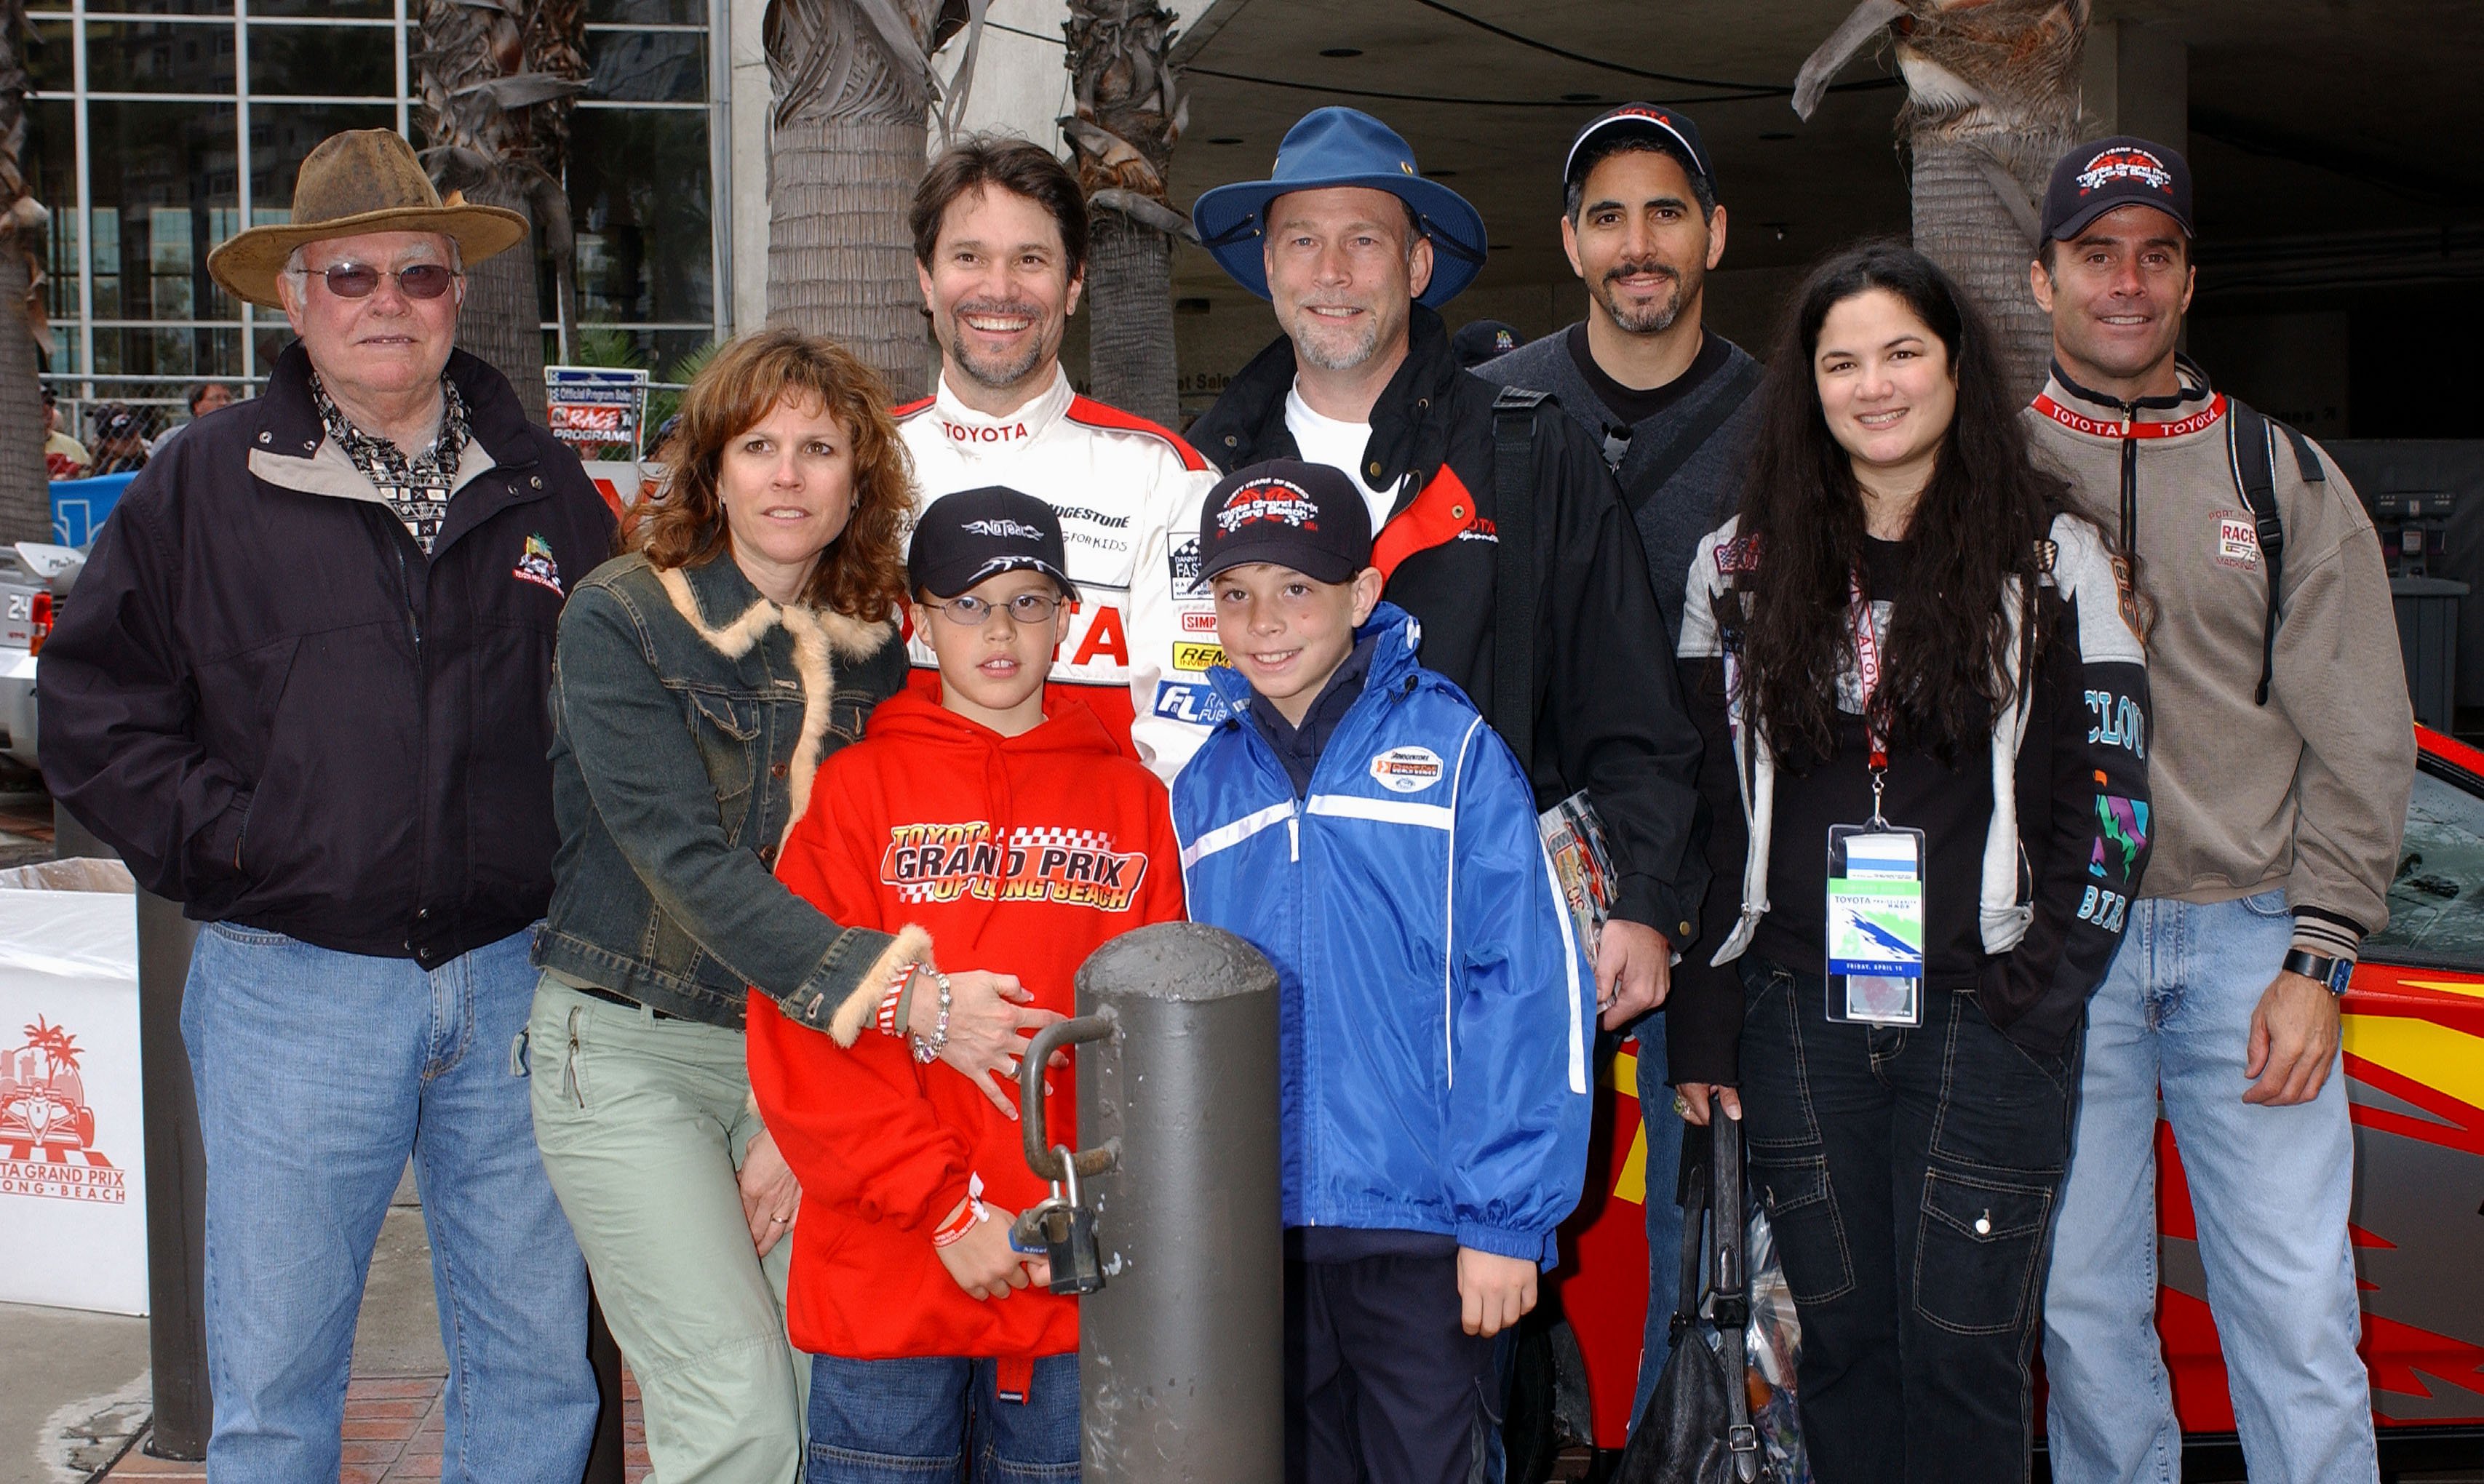 Peter Reckell and his family on April 17, 2004 at the Annual Toyota Pro/Celebrity Race | Photo: Getty Images